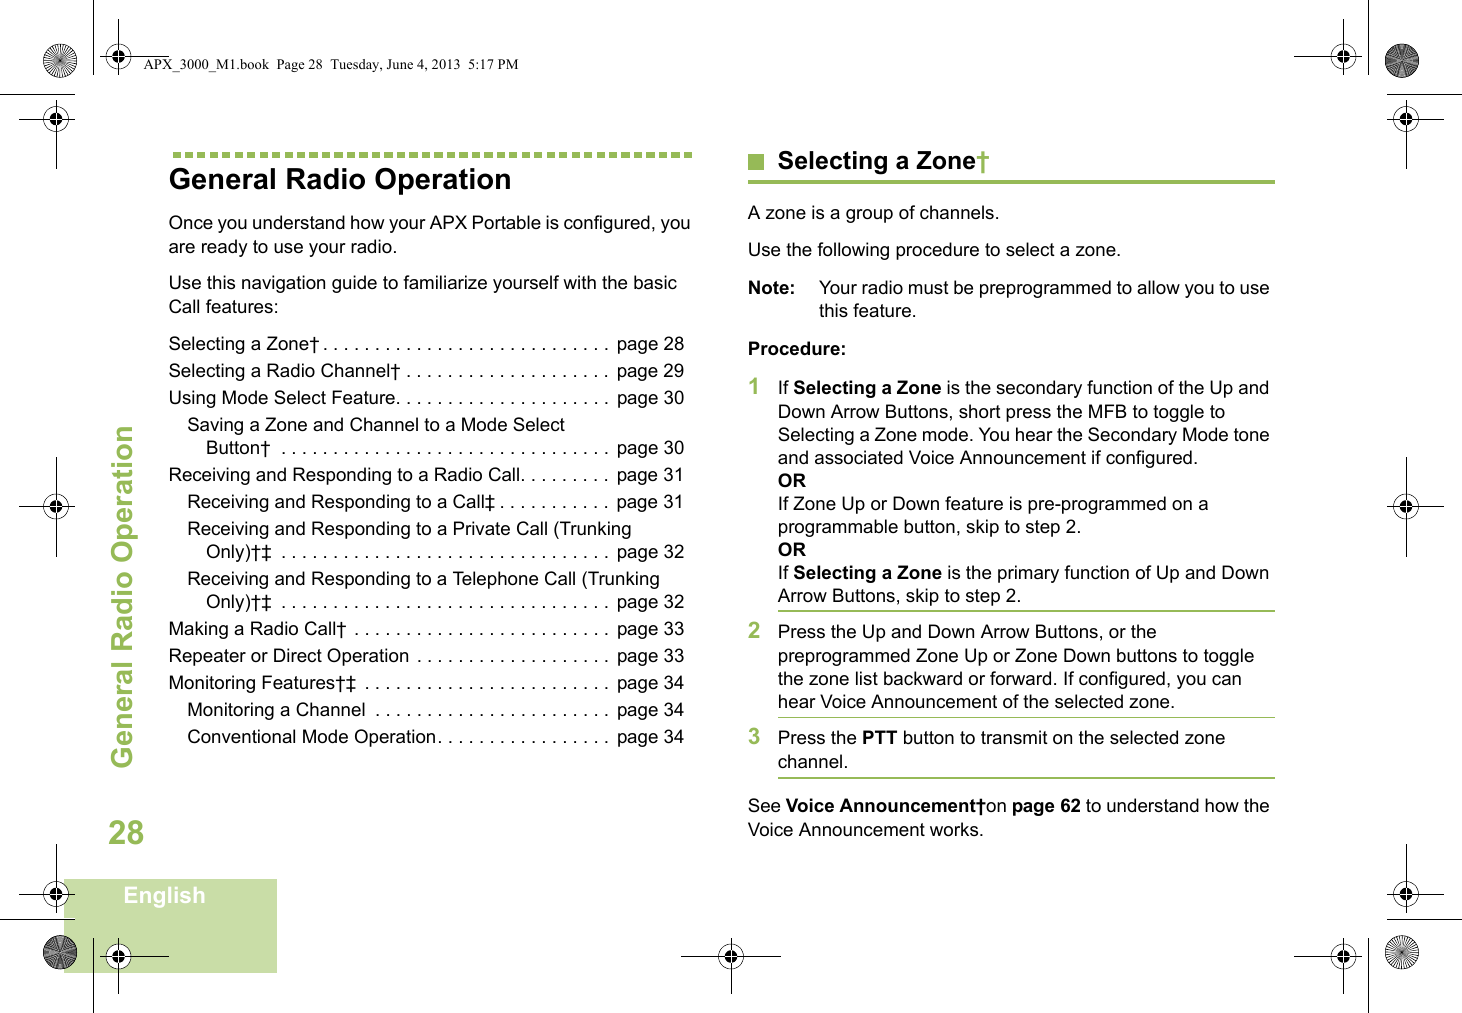 General Radio OperationEnglish28General Radio OperationOnce you understand how your APX Portable is configured, you are ready to use your radio.Use this navigation guide to familiarize yourself with the basic Call features:Selecting a Zone† . . . . . . . . . . . . . . . . . . . . . . . . . . . .  page 28Selecting a Radio Channel† . . . . . . . . . . . . . . . . . . . .  page 29Using Mode Select Feature. . . . . . . . . . . . . . . . . . . . .  page 30Saving a Zone and Channel to a Mode Select Button†  . . . . . . . . . . . . . . . . . . . . . . . . . . . . . . . .  page 30Receiving and Responding to a Radio Call. . . . . . . . .  page 31Receiving and Responding to a Call‡ . . . . . . . . . . .  page 31Receiving and Responding to a Private Call (Trunking Only)†‡  . . . . . . . . . . . . . . . . . . . . . . . . . . . . . . . .  page 32Receiving and Responding to a Telephone Call (Trunking Only)†‡  . . . . . . . . . . . . . . . . . . . . . . . . . . . . . . . .  page 32Making a Radio Call† . . . . . . . . . . . . . . . . . . . . . . . . .  page 33Repeater or Direct Operation . . . . . . . . . . . . . . . . . . .  page 33Monitoring Features†‡  . . . . . . . . . . . . . . . . . . . . . . . .  page 34Monitoring a Channel  . . . . . . . . . . . . . . . . . . . . . . .  page 34Conventional Mode Operation. . . . . . . . . . . . . . . . .  page 34Selecting a Zone†A zone is a group of channels. Use the following procedure to select a zone.Note: Your radio must be preprogrammed to allow you to use this feature.Procedure:1If Selecting a Zone is the secondary function of the Up and Down Arrow Buttons, short press the MFB to toggle to Selecting a Zone mode. You hear the Secondary Mode tone and associated Voice Announcement if configured. ORIf Zone Up or Down feature is pre-programmed on a programmable button, skip to step 2.ORIf Selecting a Zone is the primary function of Up and Down Arrow Buttons, skip to step 2.2Press the Up and Down Arrow Buttons, or the preprogrammed Zone Up or Zone Down buttons to toggle the zone list backward or forward. If configured, you can hear Voice Announcement of the selected zone.3Press the PTT button to transmit on the selected zone channel.See Voice Announcement†on page 62 to understand how the Voice Announcement works.APX_3000_M1.book  Page 28  Tuesday, June 4, 2013  5:17 PM